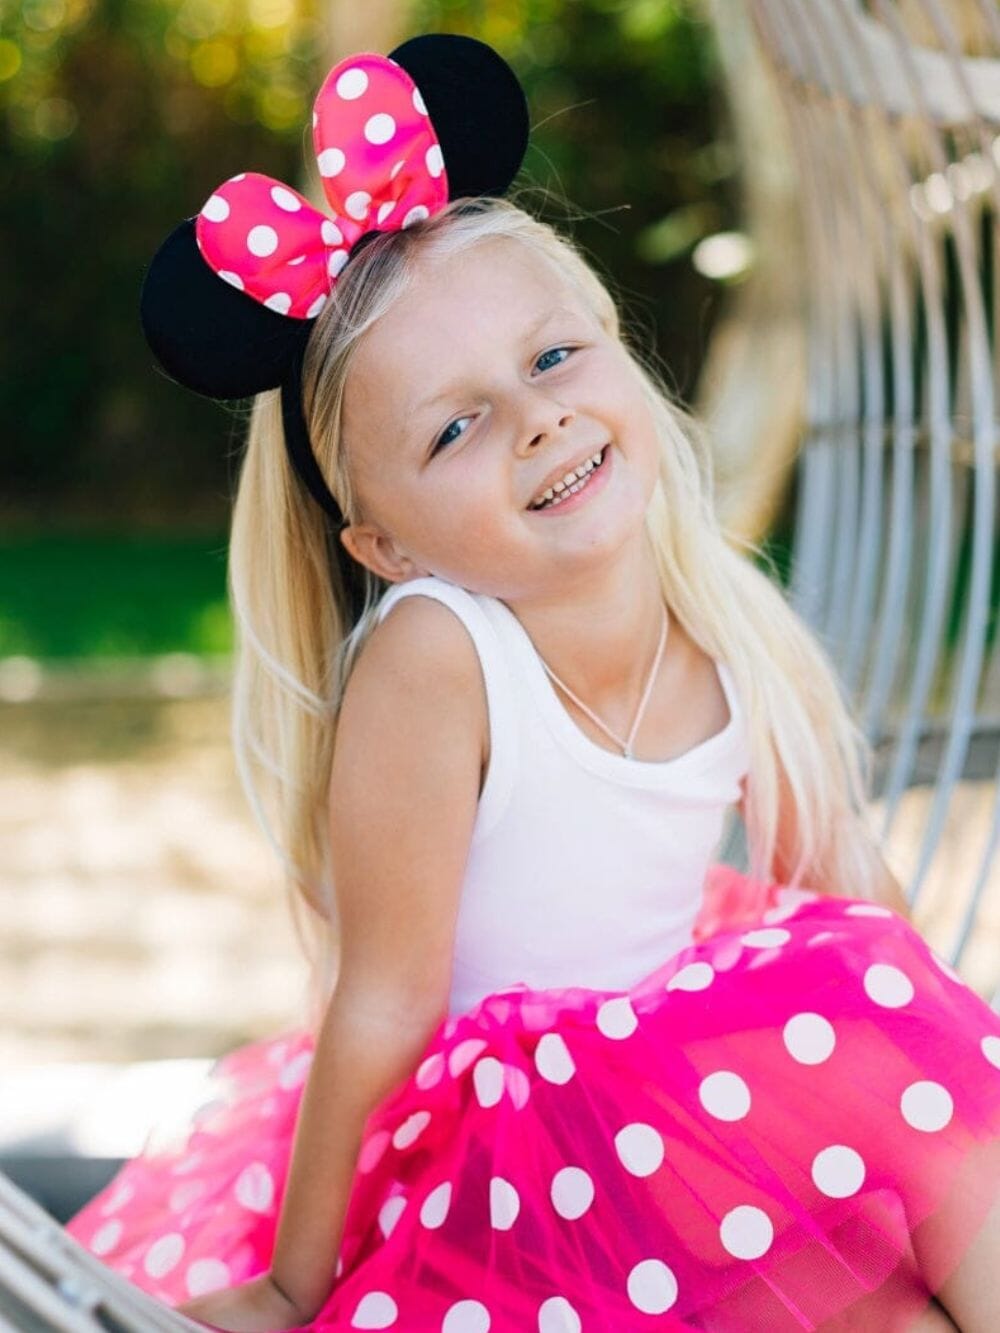 Hot Pink Polka Dot Mouse Girls Headband Ears, Kid or Adult Costume Accessories - Sydney So Sweet